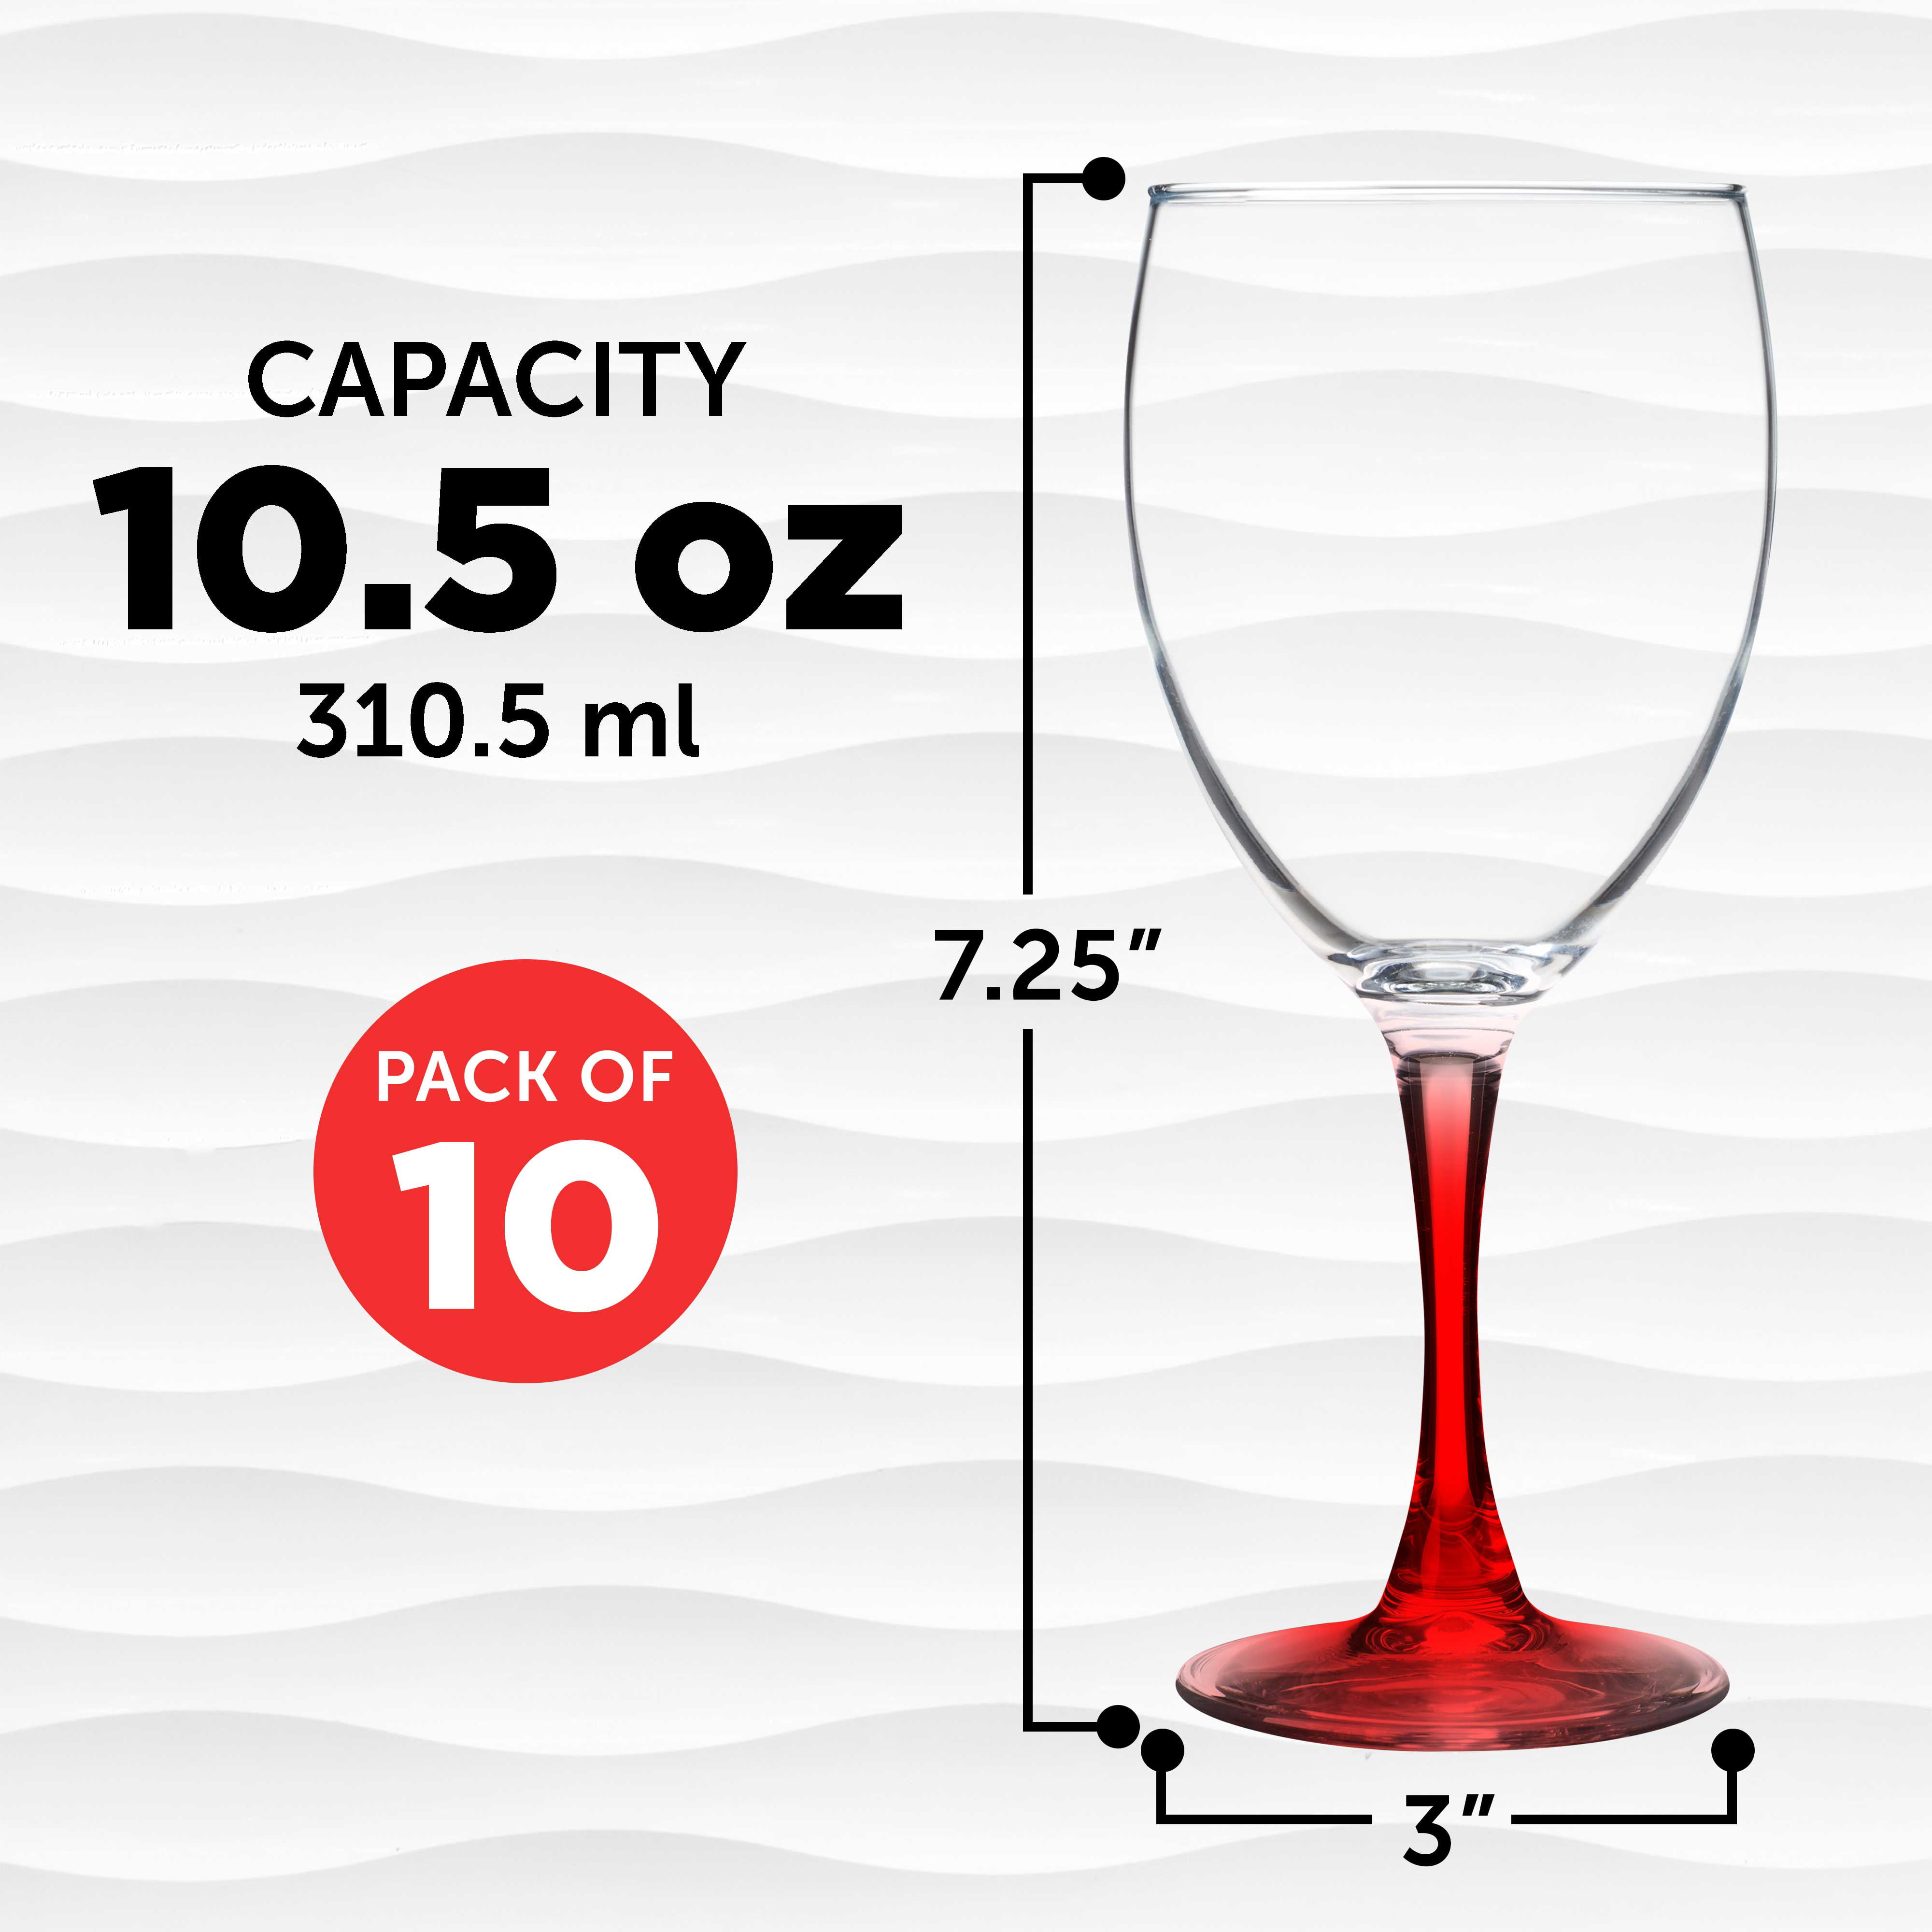 Tabletop King 10 oz Wine Glasses, Stemmed Style, Nuance Bottom Accent, Red, Set of 6, Size: One Size